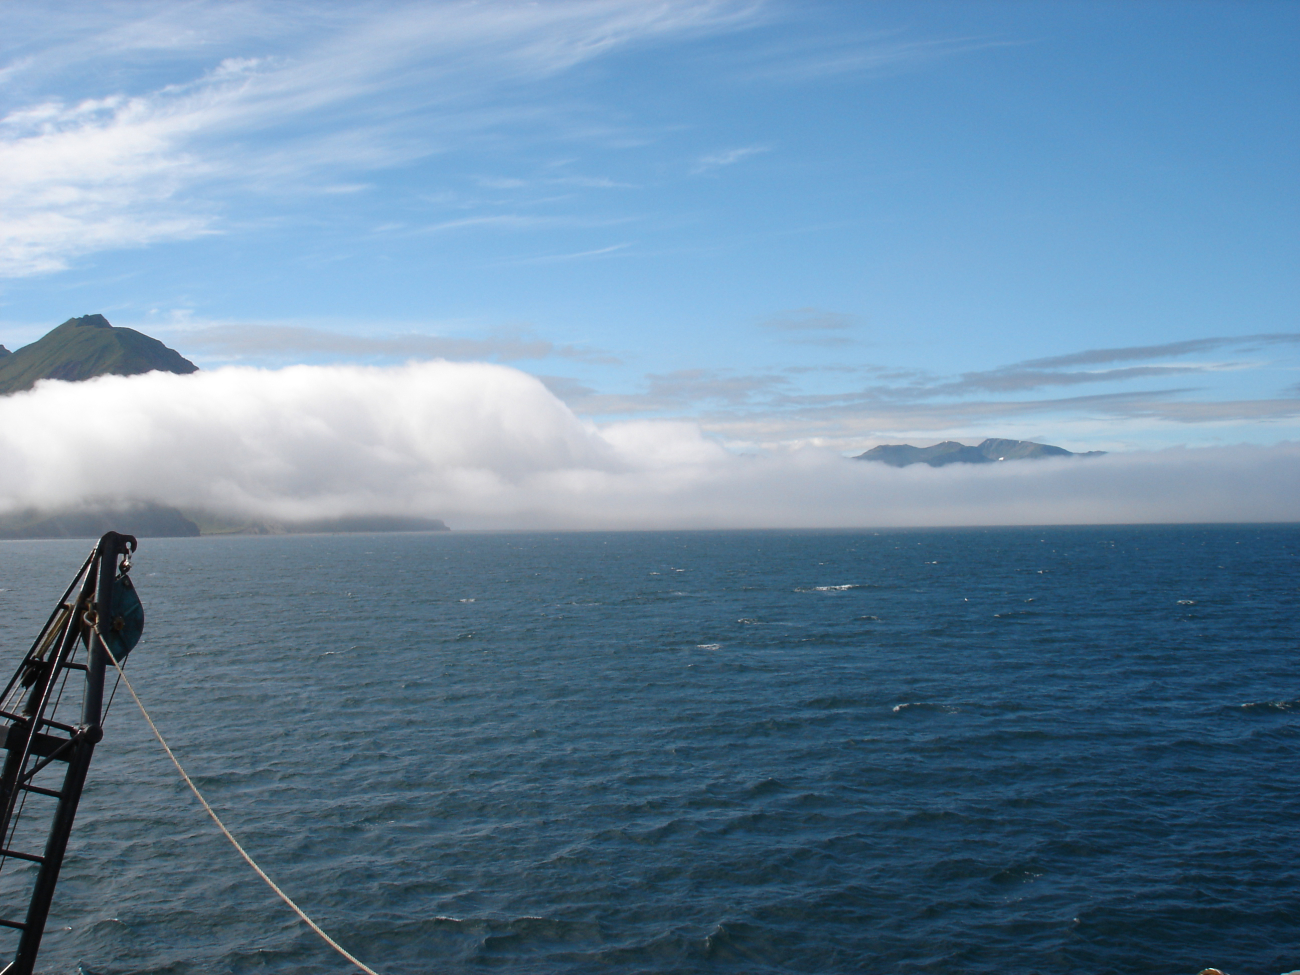 Sun and fog in the Aleutians with high peaks showing above the fog